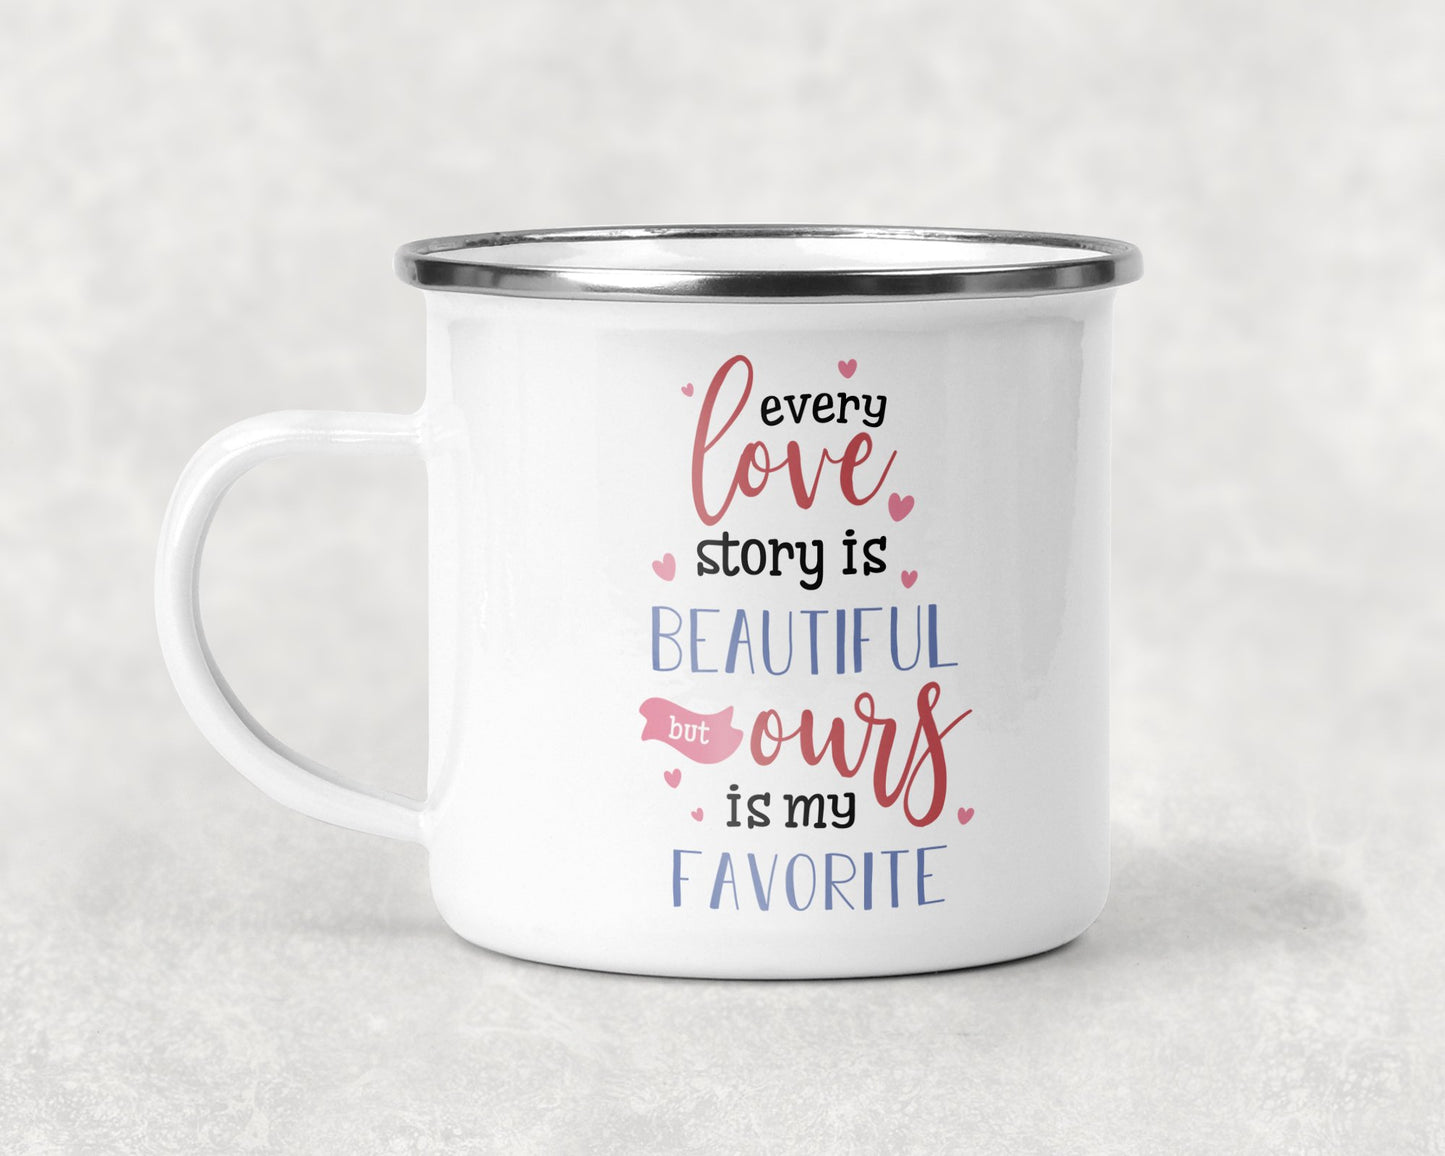 Every Love Story Is Beautiful But Ours My Favorite Mug Coffee